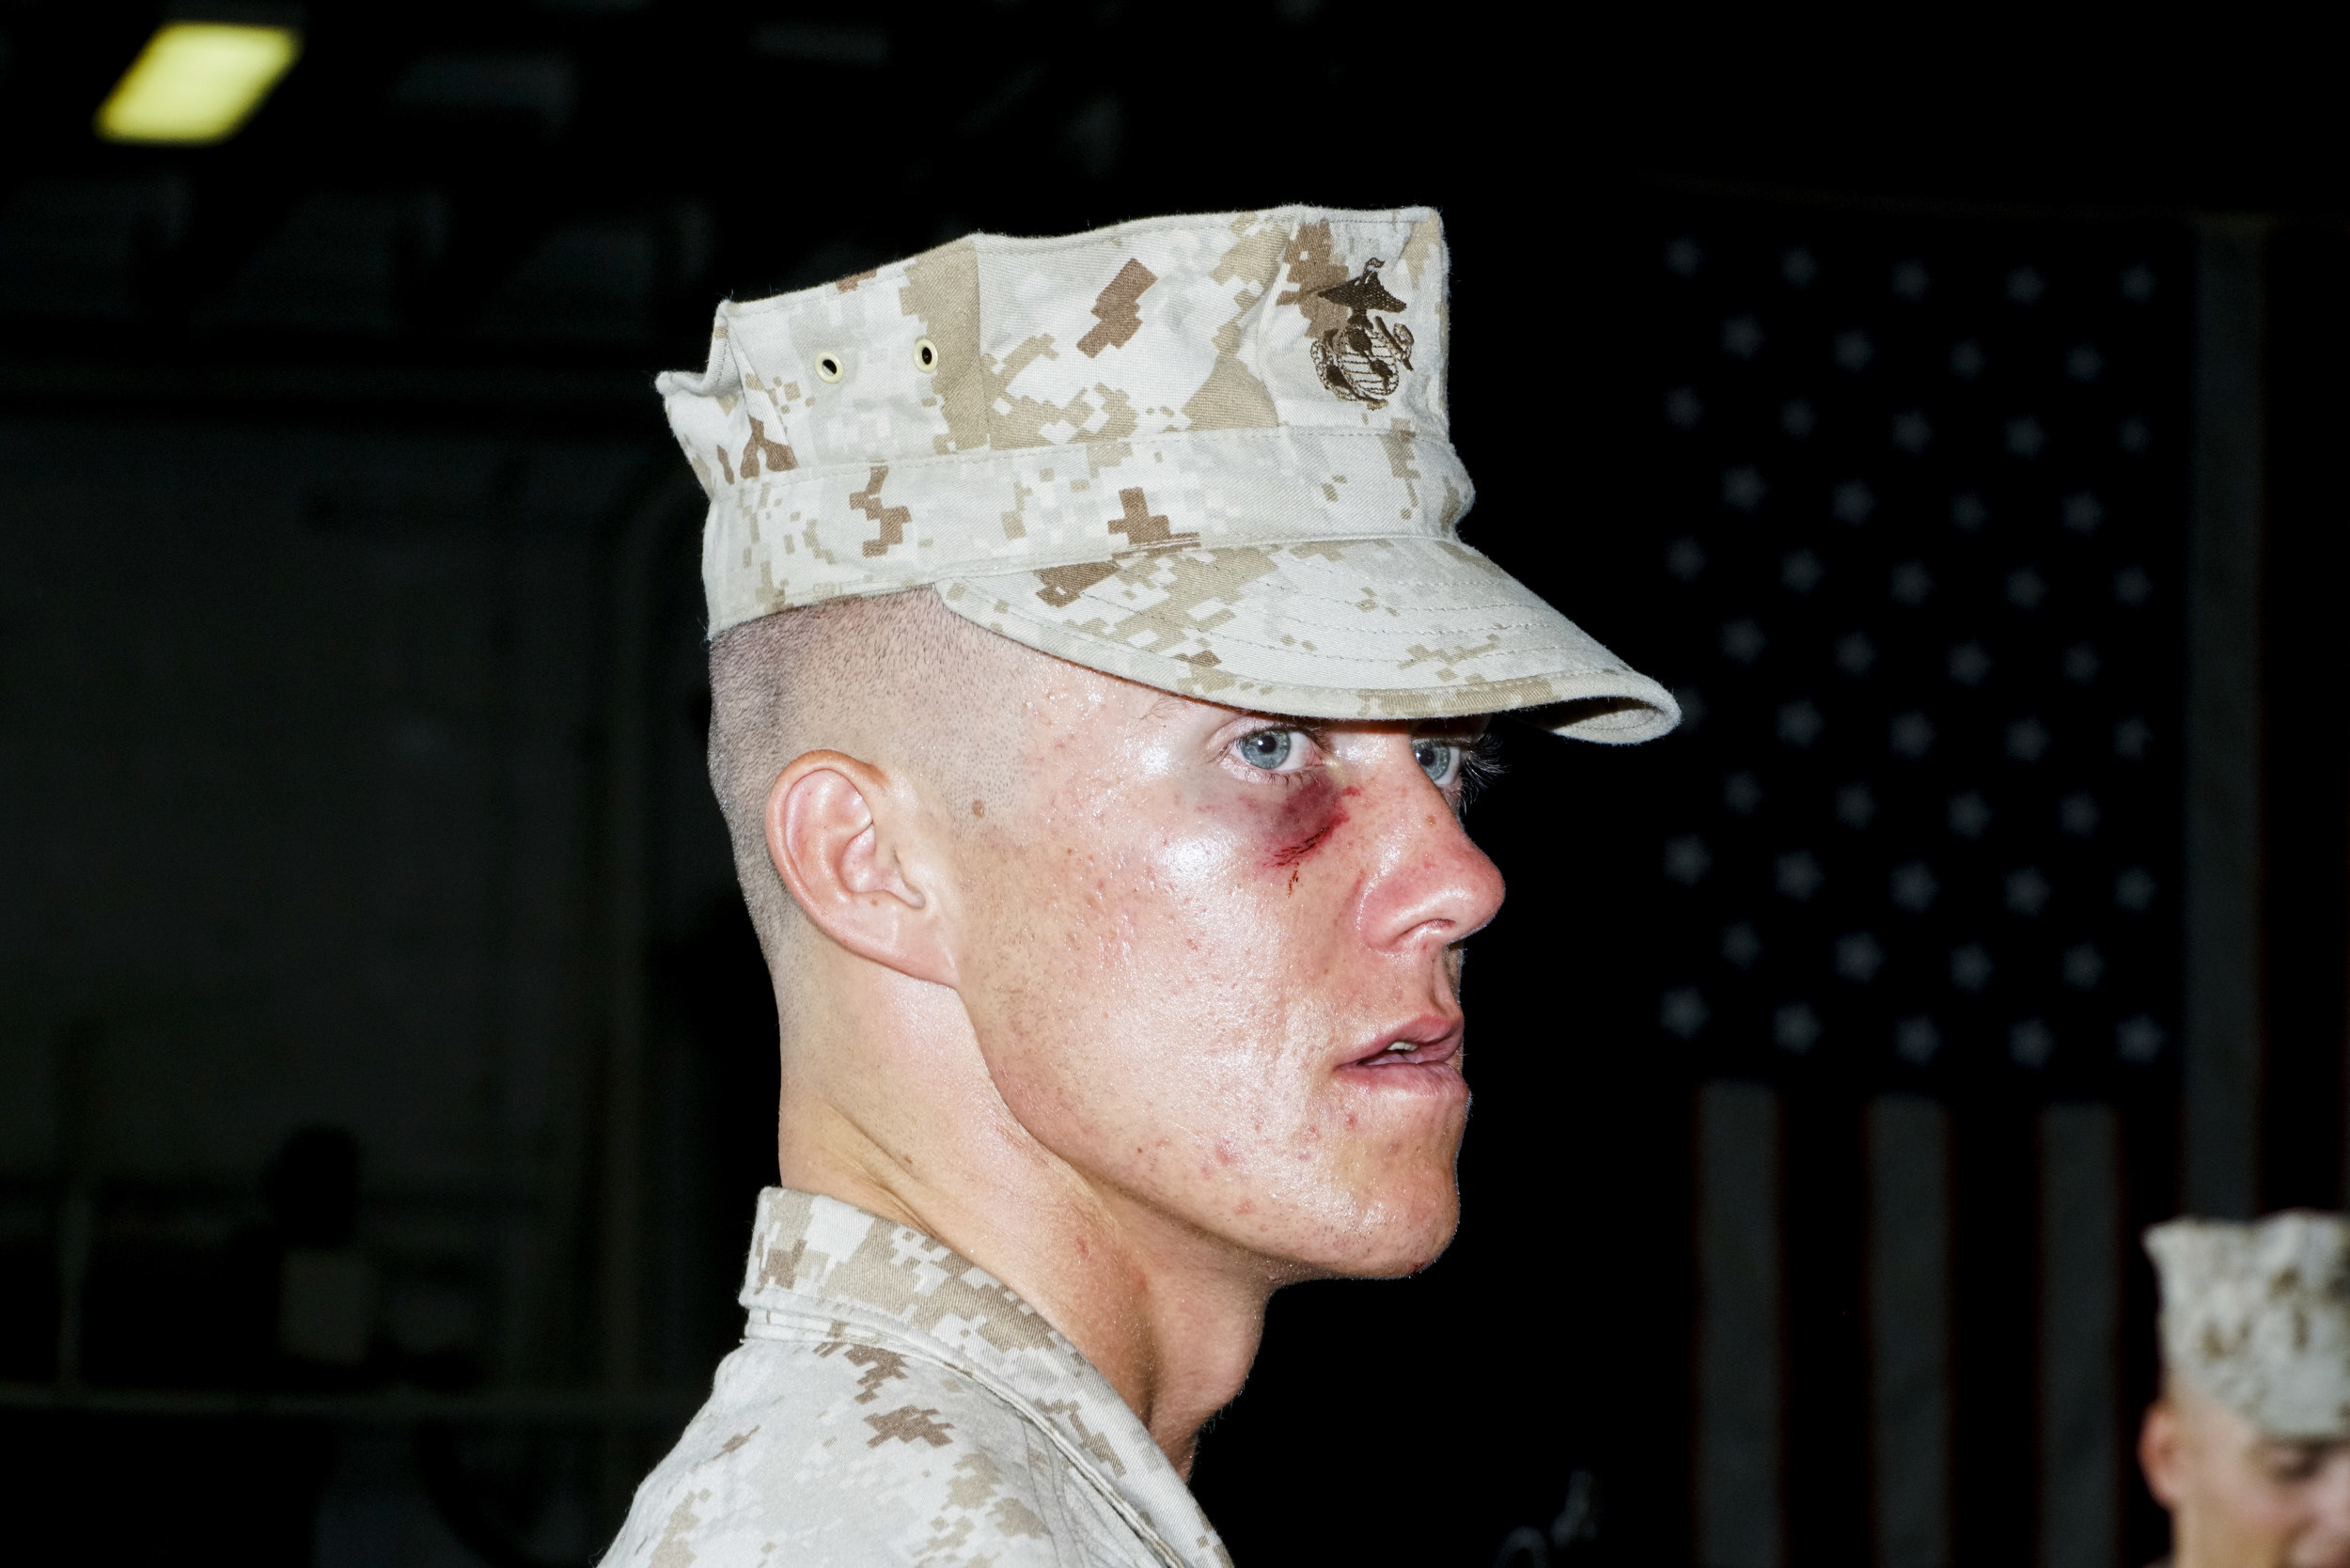 A man in Marine uniform with a black eye looks past the camera